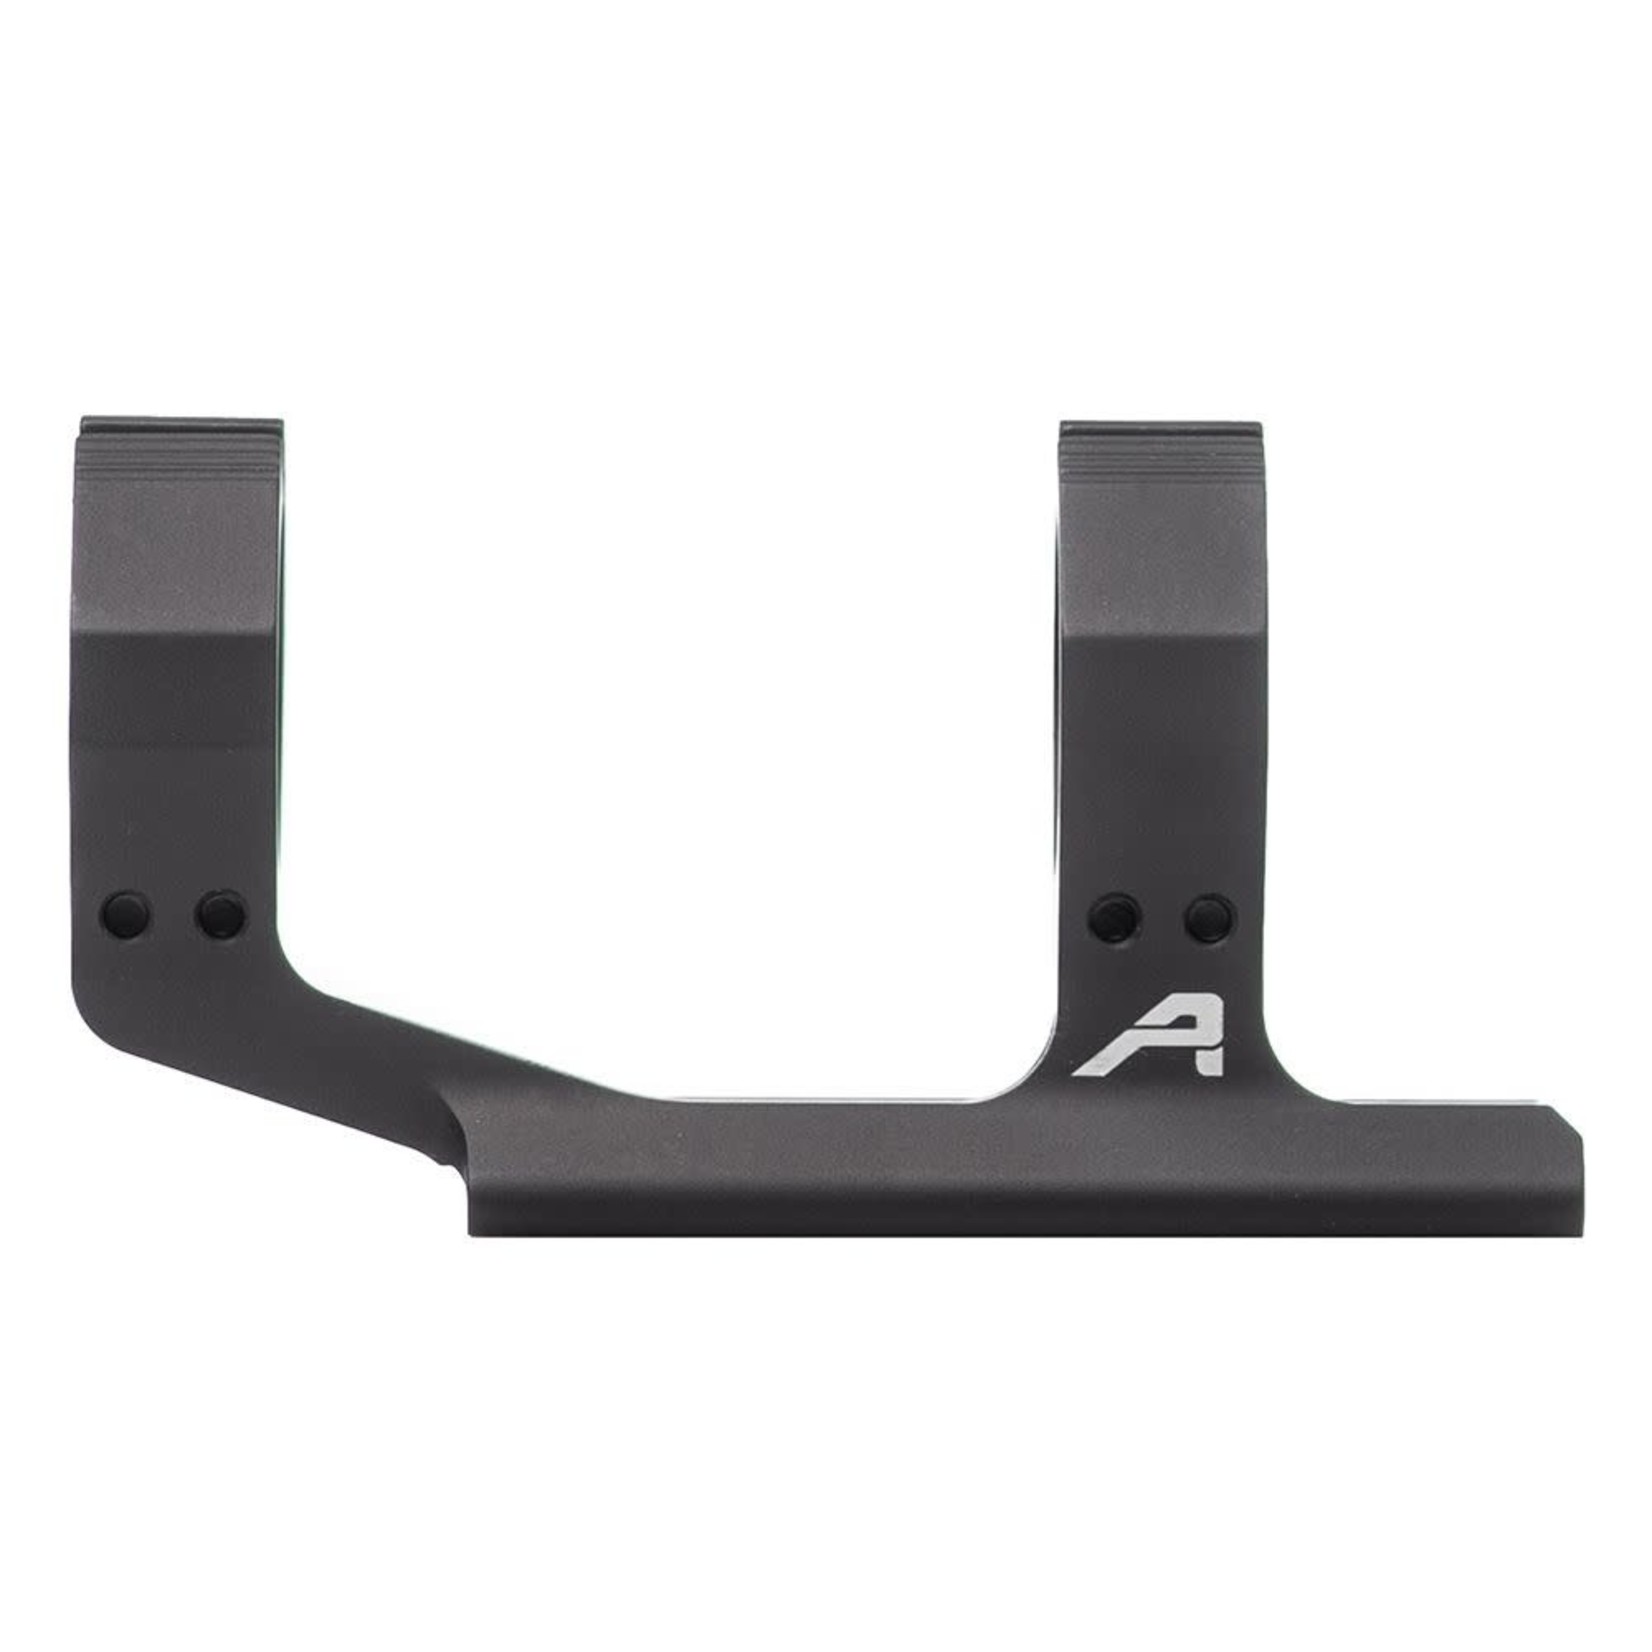 AERO PRECISION EXTENDED ULTRALIGHT 30MM SCOPE MOUNT - ANODIZED BLACK